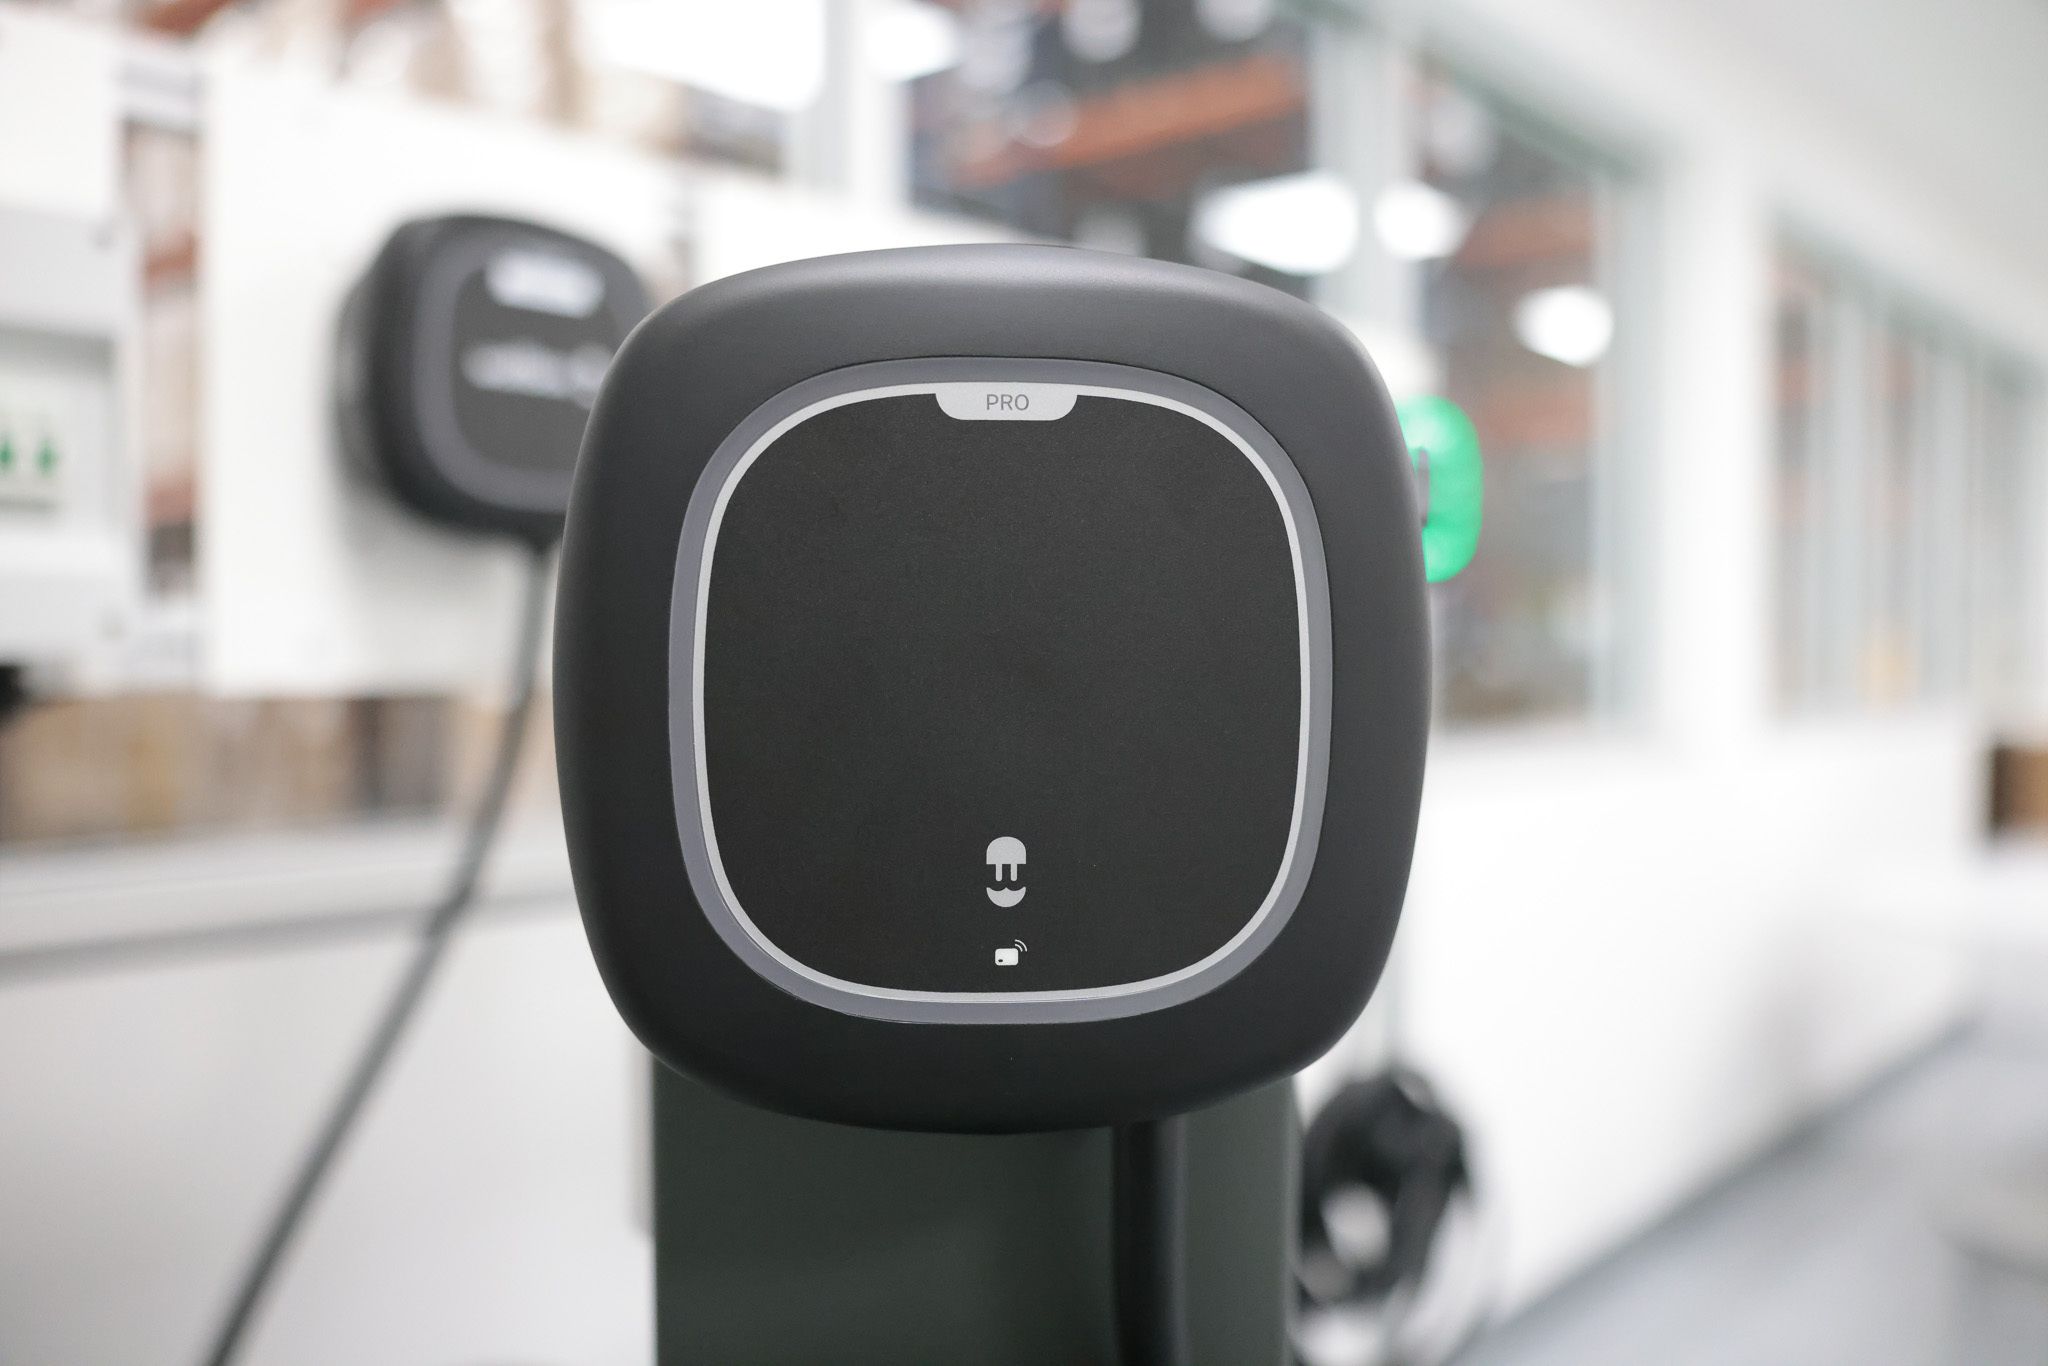 Wallbox Launches Pulsar Pro North America, Its Latest AC Charger Designed Specifically for EV Charging in Shared Spaces